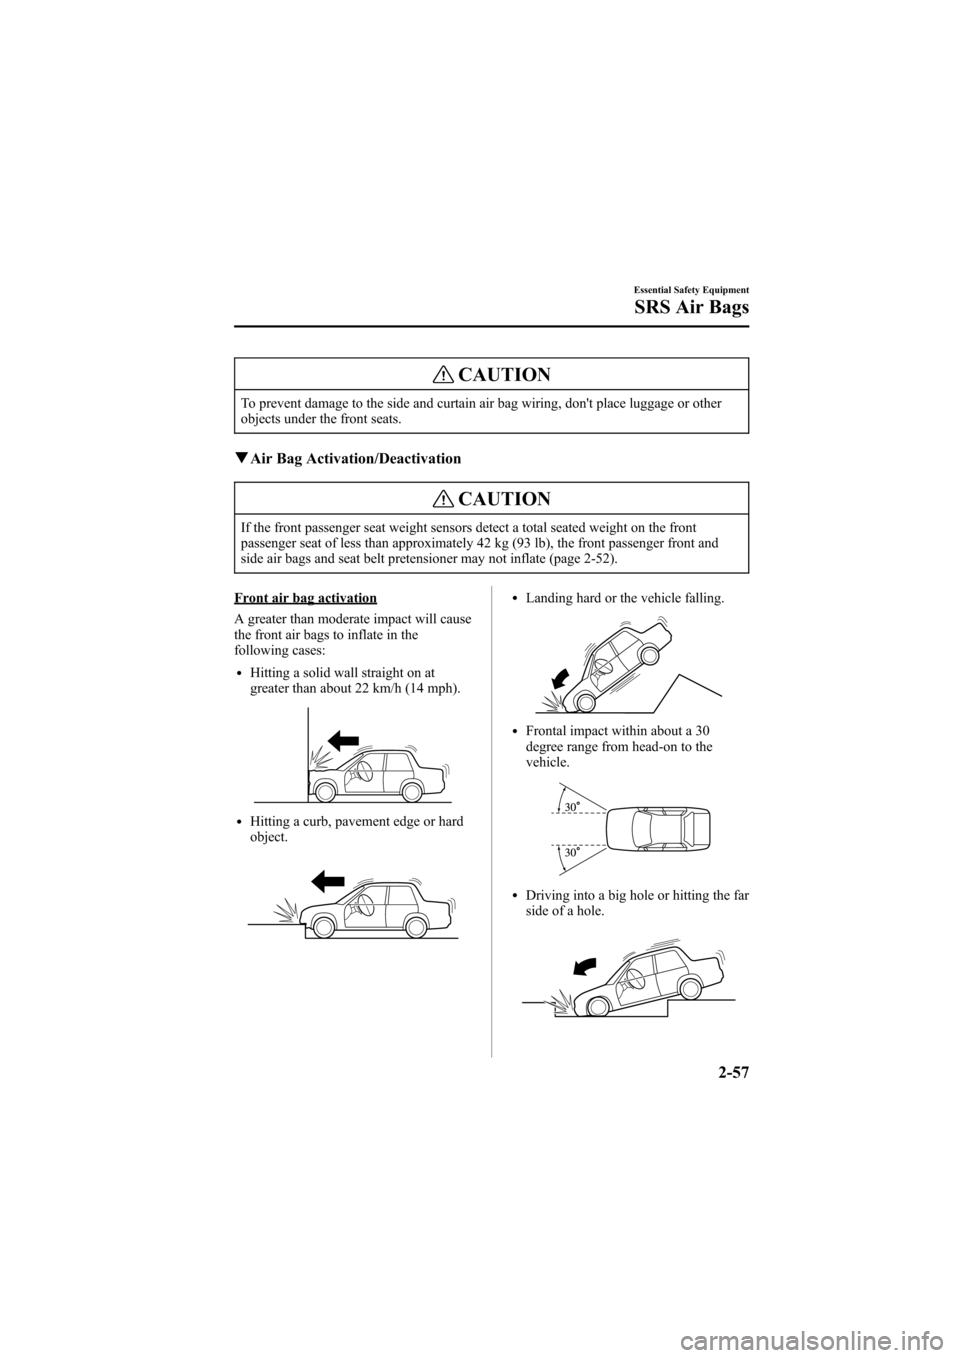 MAZDA MODEL 6 2005   (in English) Manual PDF Black plate (71,1)
CAUTION
To prevent damage to the side and curtain air bag wiring, dont place luggage or other
objects under the front seats.
qAir Bag Activation/Deactivation
CAUTION
If the front p